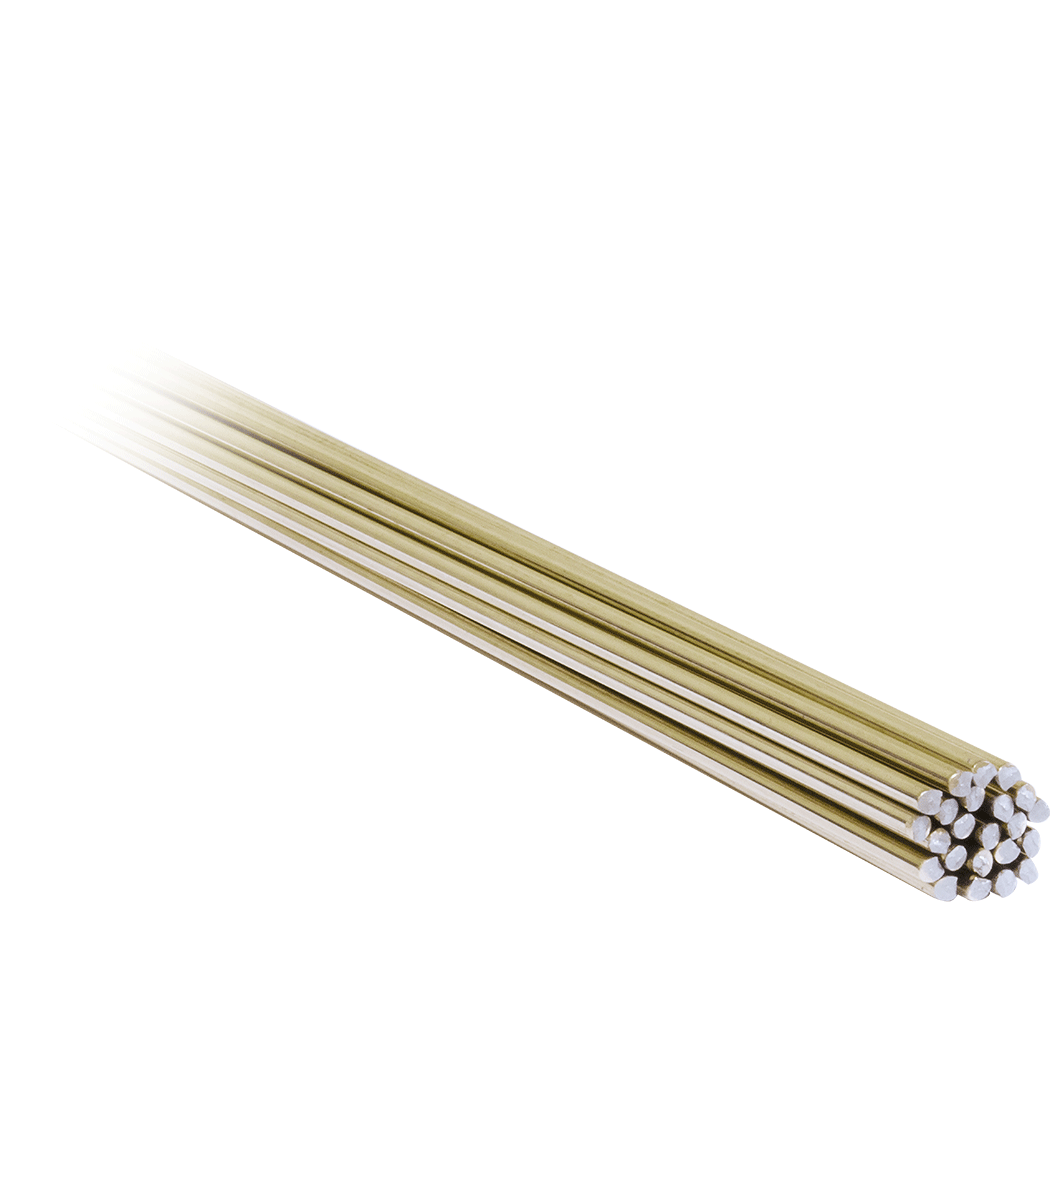 Wesbite Name: 50% Silver Brazing Rods